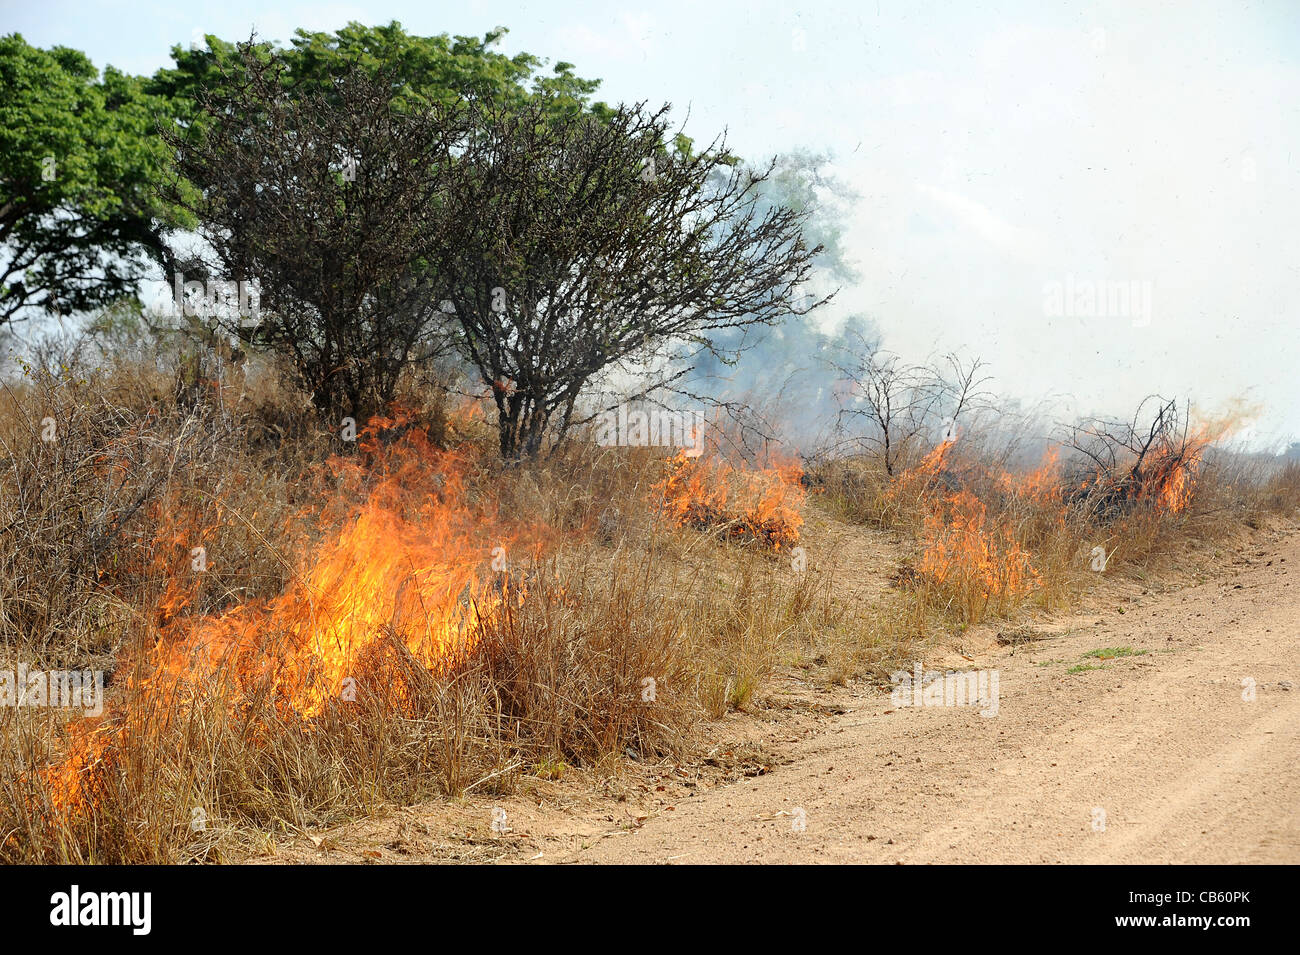 Savannah fires lit to improve and stimulate growth of  new grass. Stock Photo